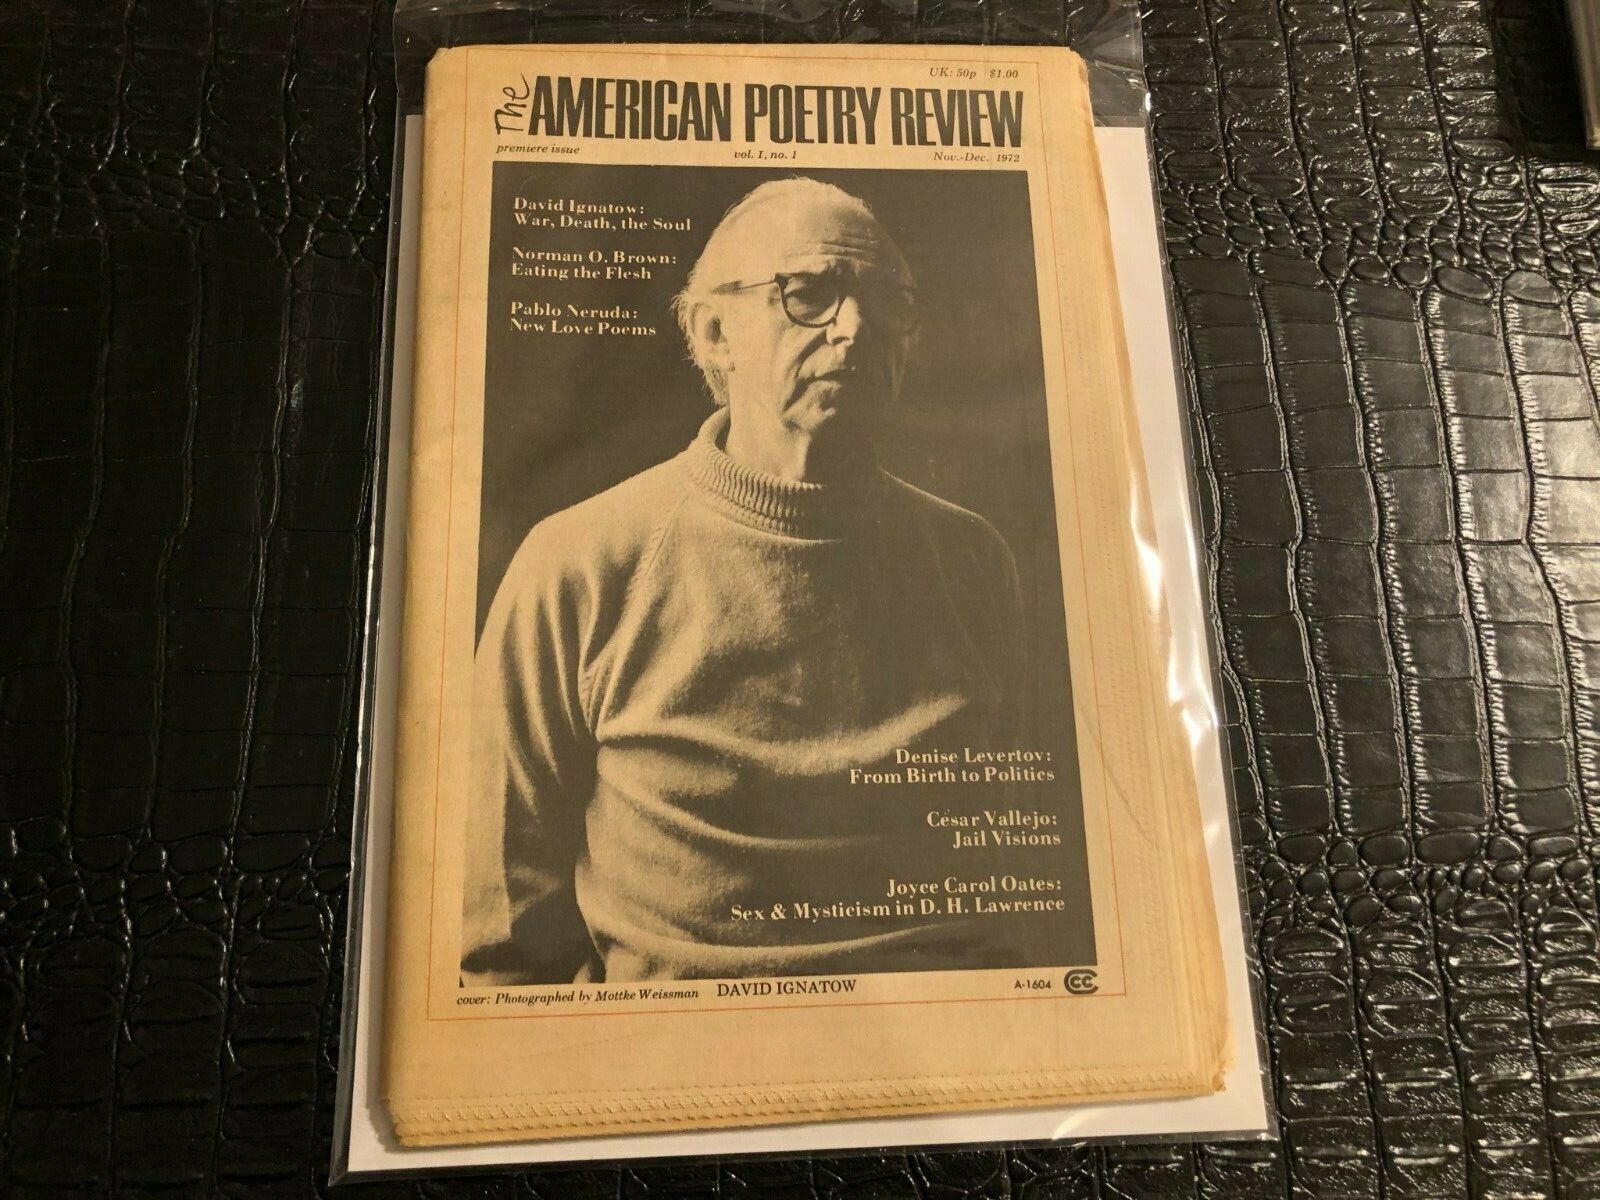 NOV/DEC 1972 AMERICAN POETRY REVIEW magazine (O)  FIRST ISSUE  (UNREAD)